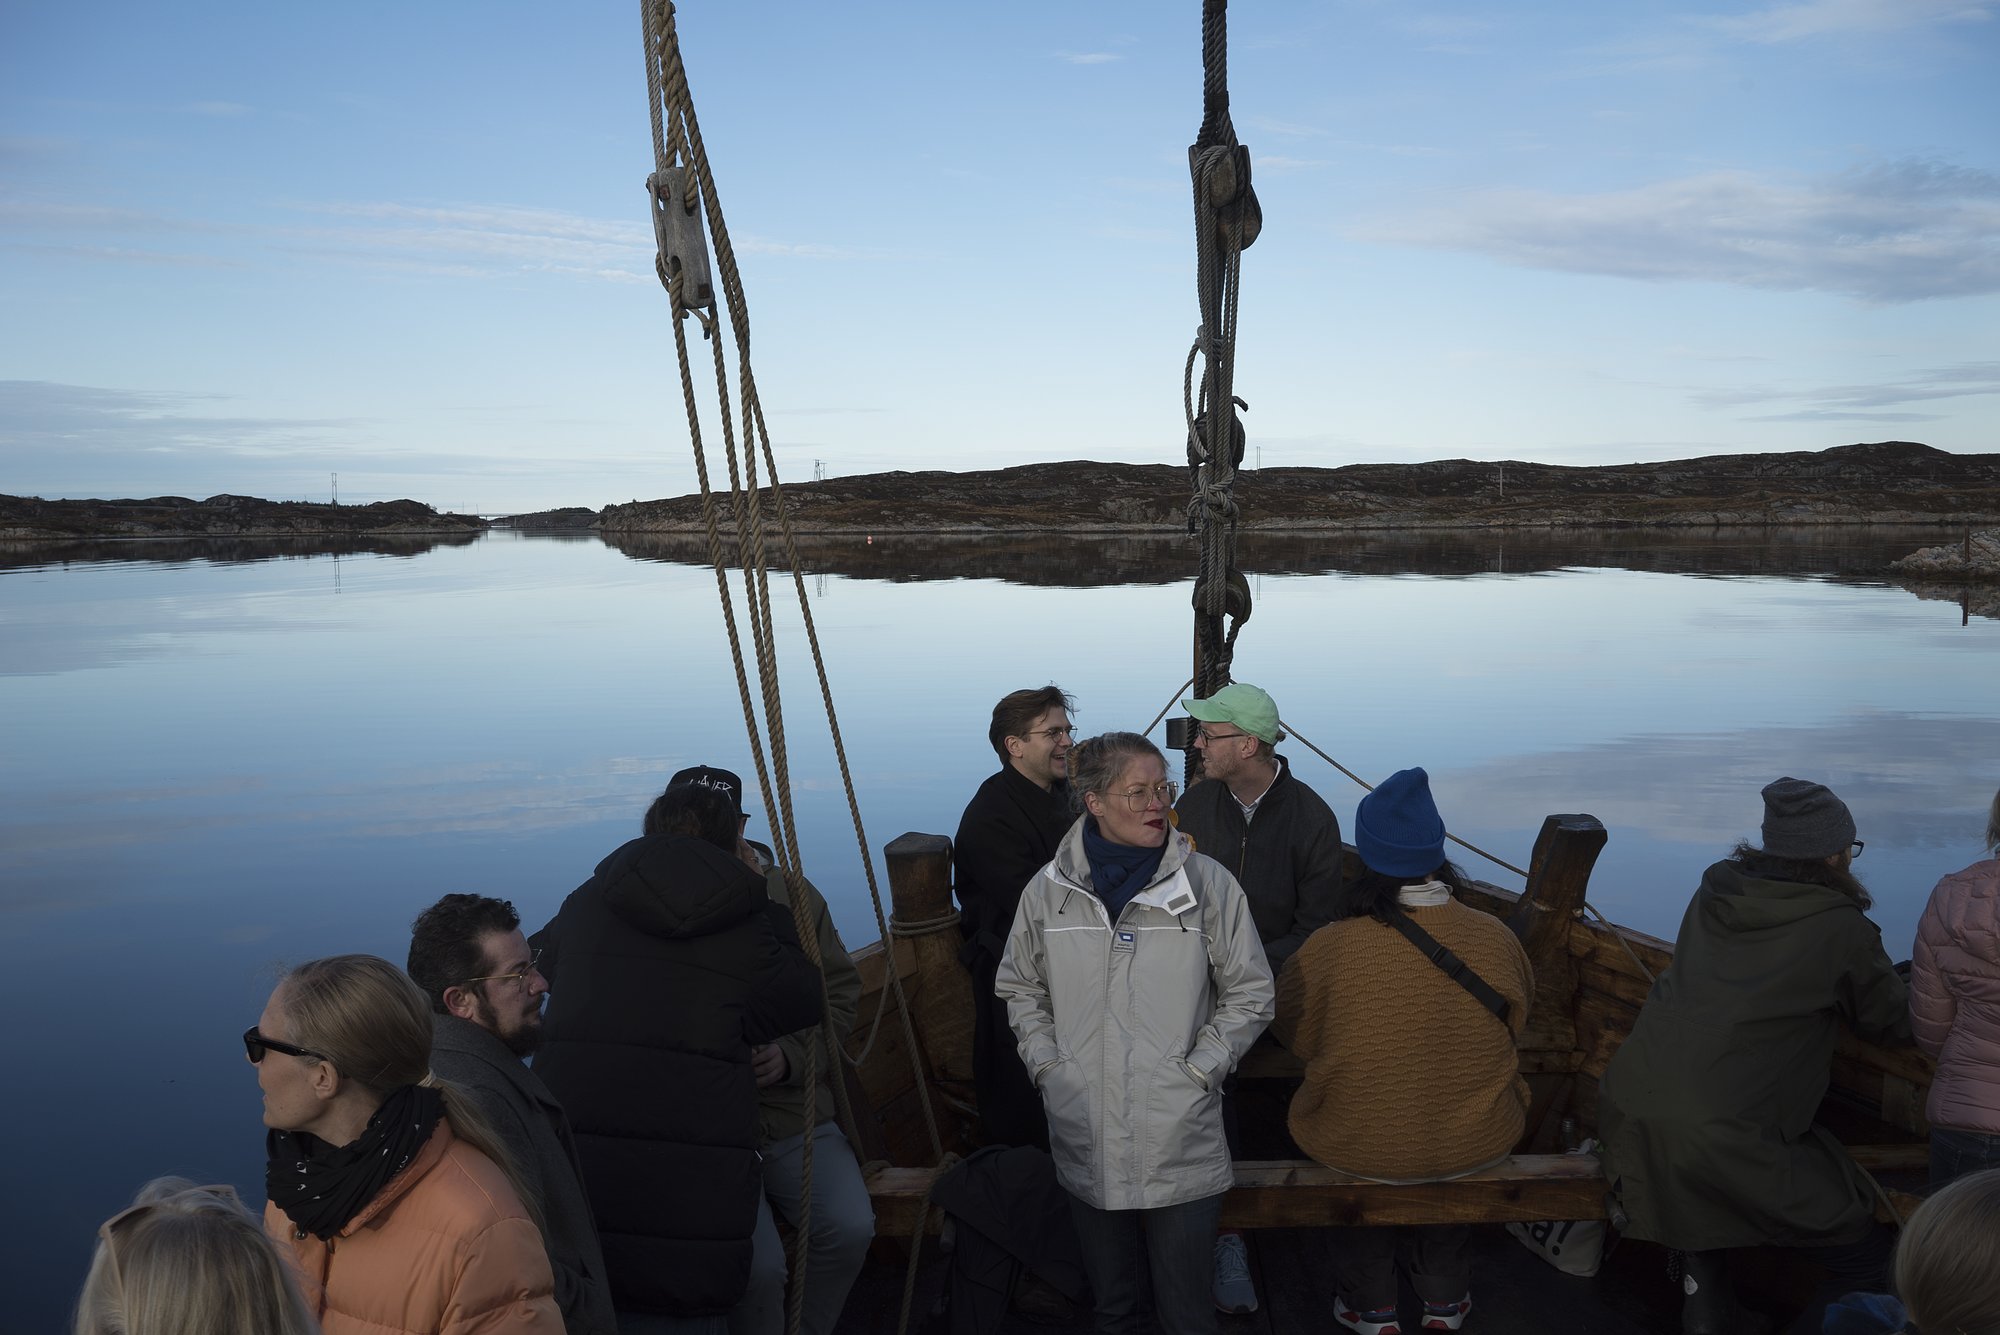 Everybody Reads Fishing. A reading group and fishing trip in Hustadvika by curator Valentinas Klimasauskas, Lithuania. Coast 2019